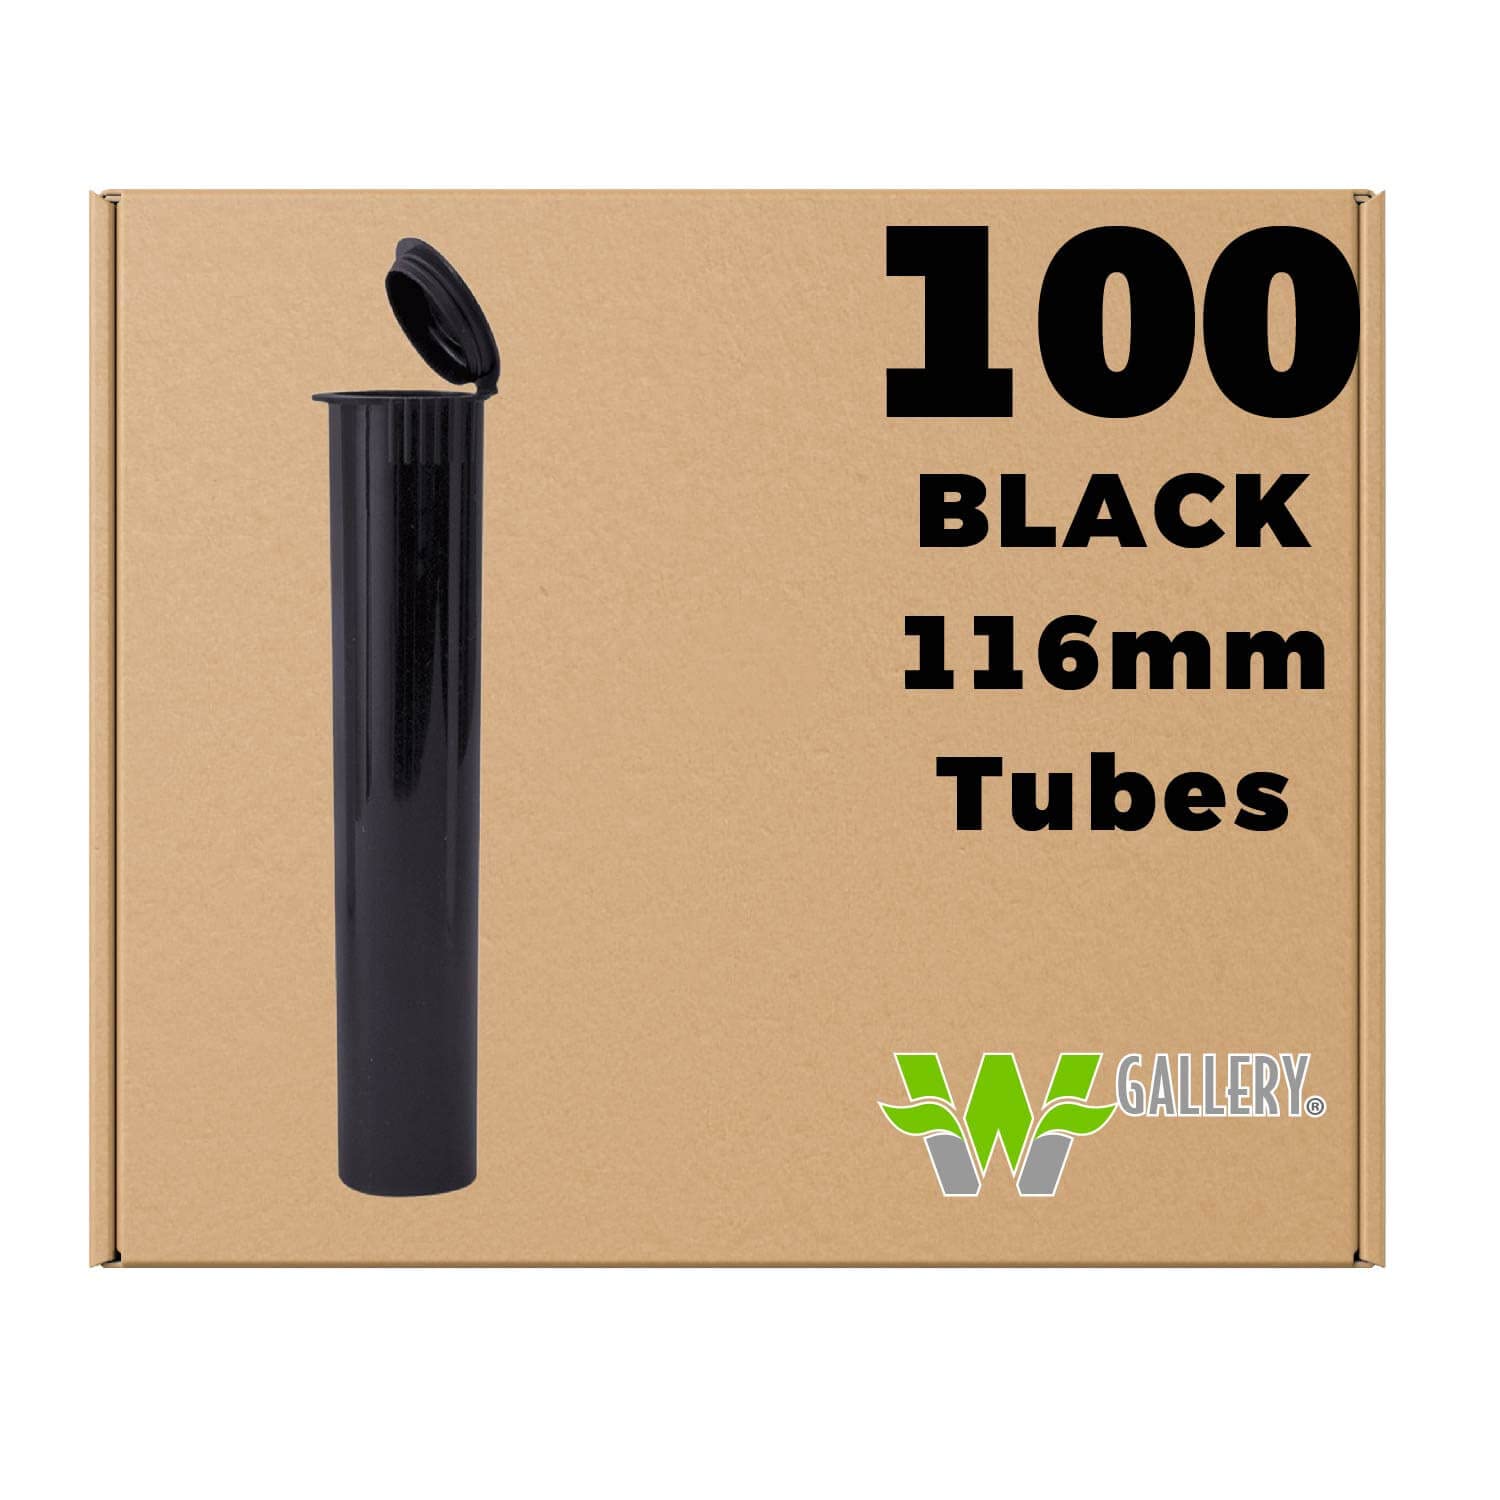 W Gallery 50 Black 116mm Tubes Pop Top Joint is Open Smell-Proof